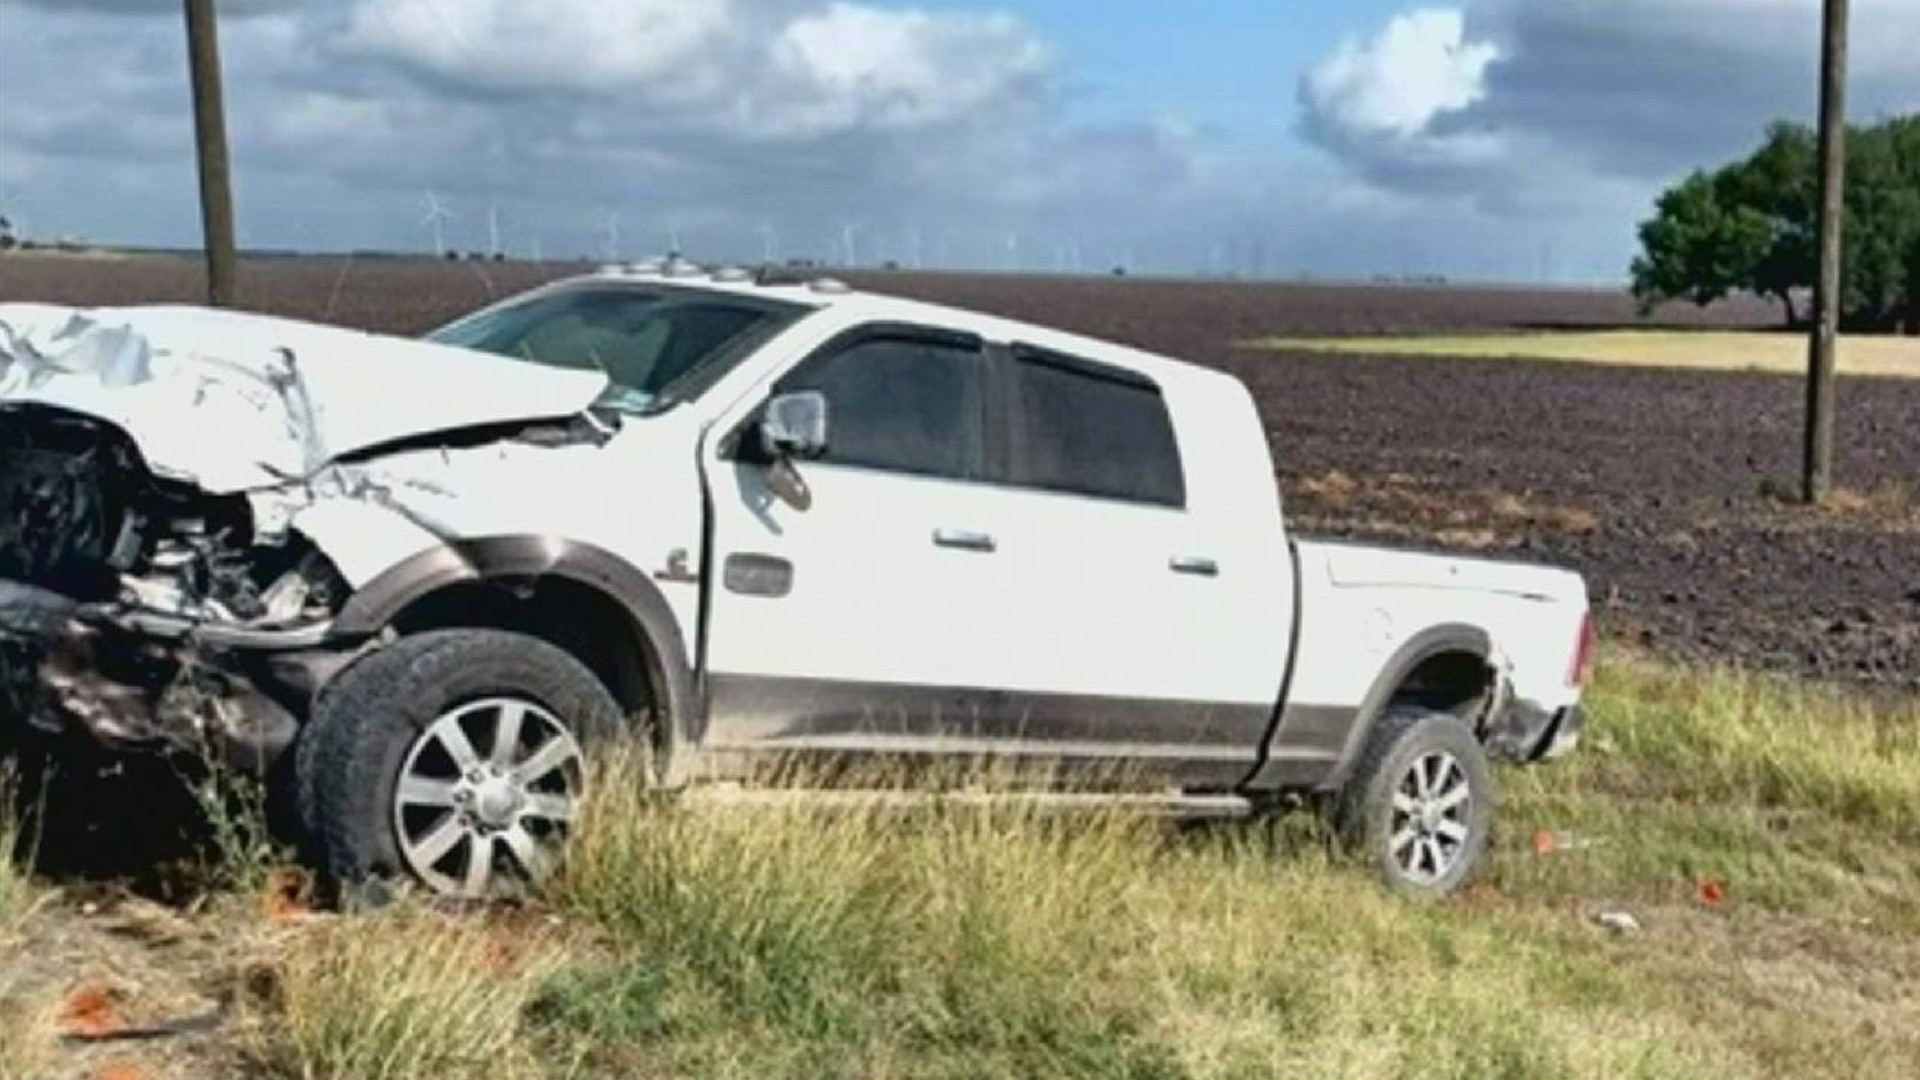 The crash happened Thursday morning on TX-188 and FM 796, officials said.